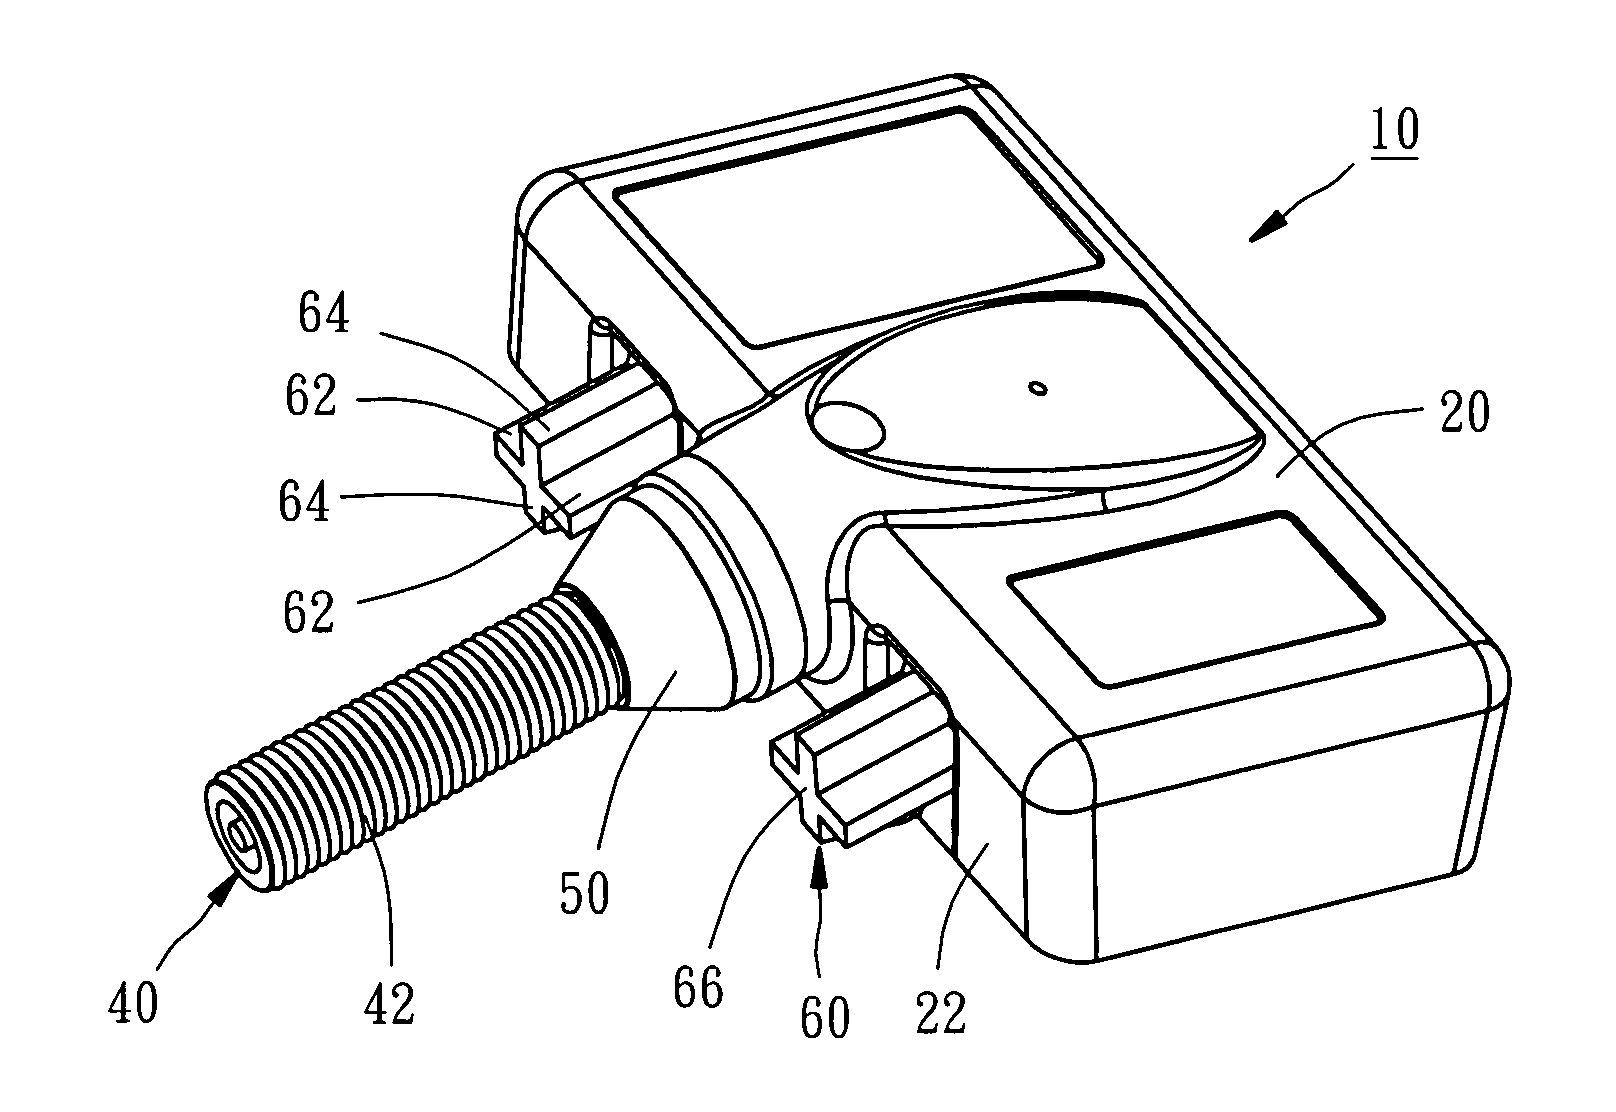 Tire pressure gauge with displacement limiting members